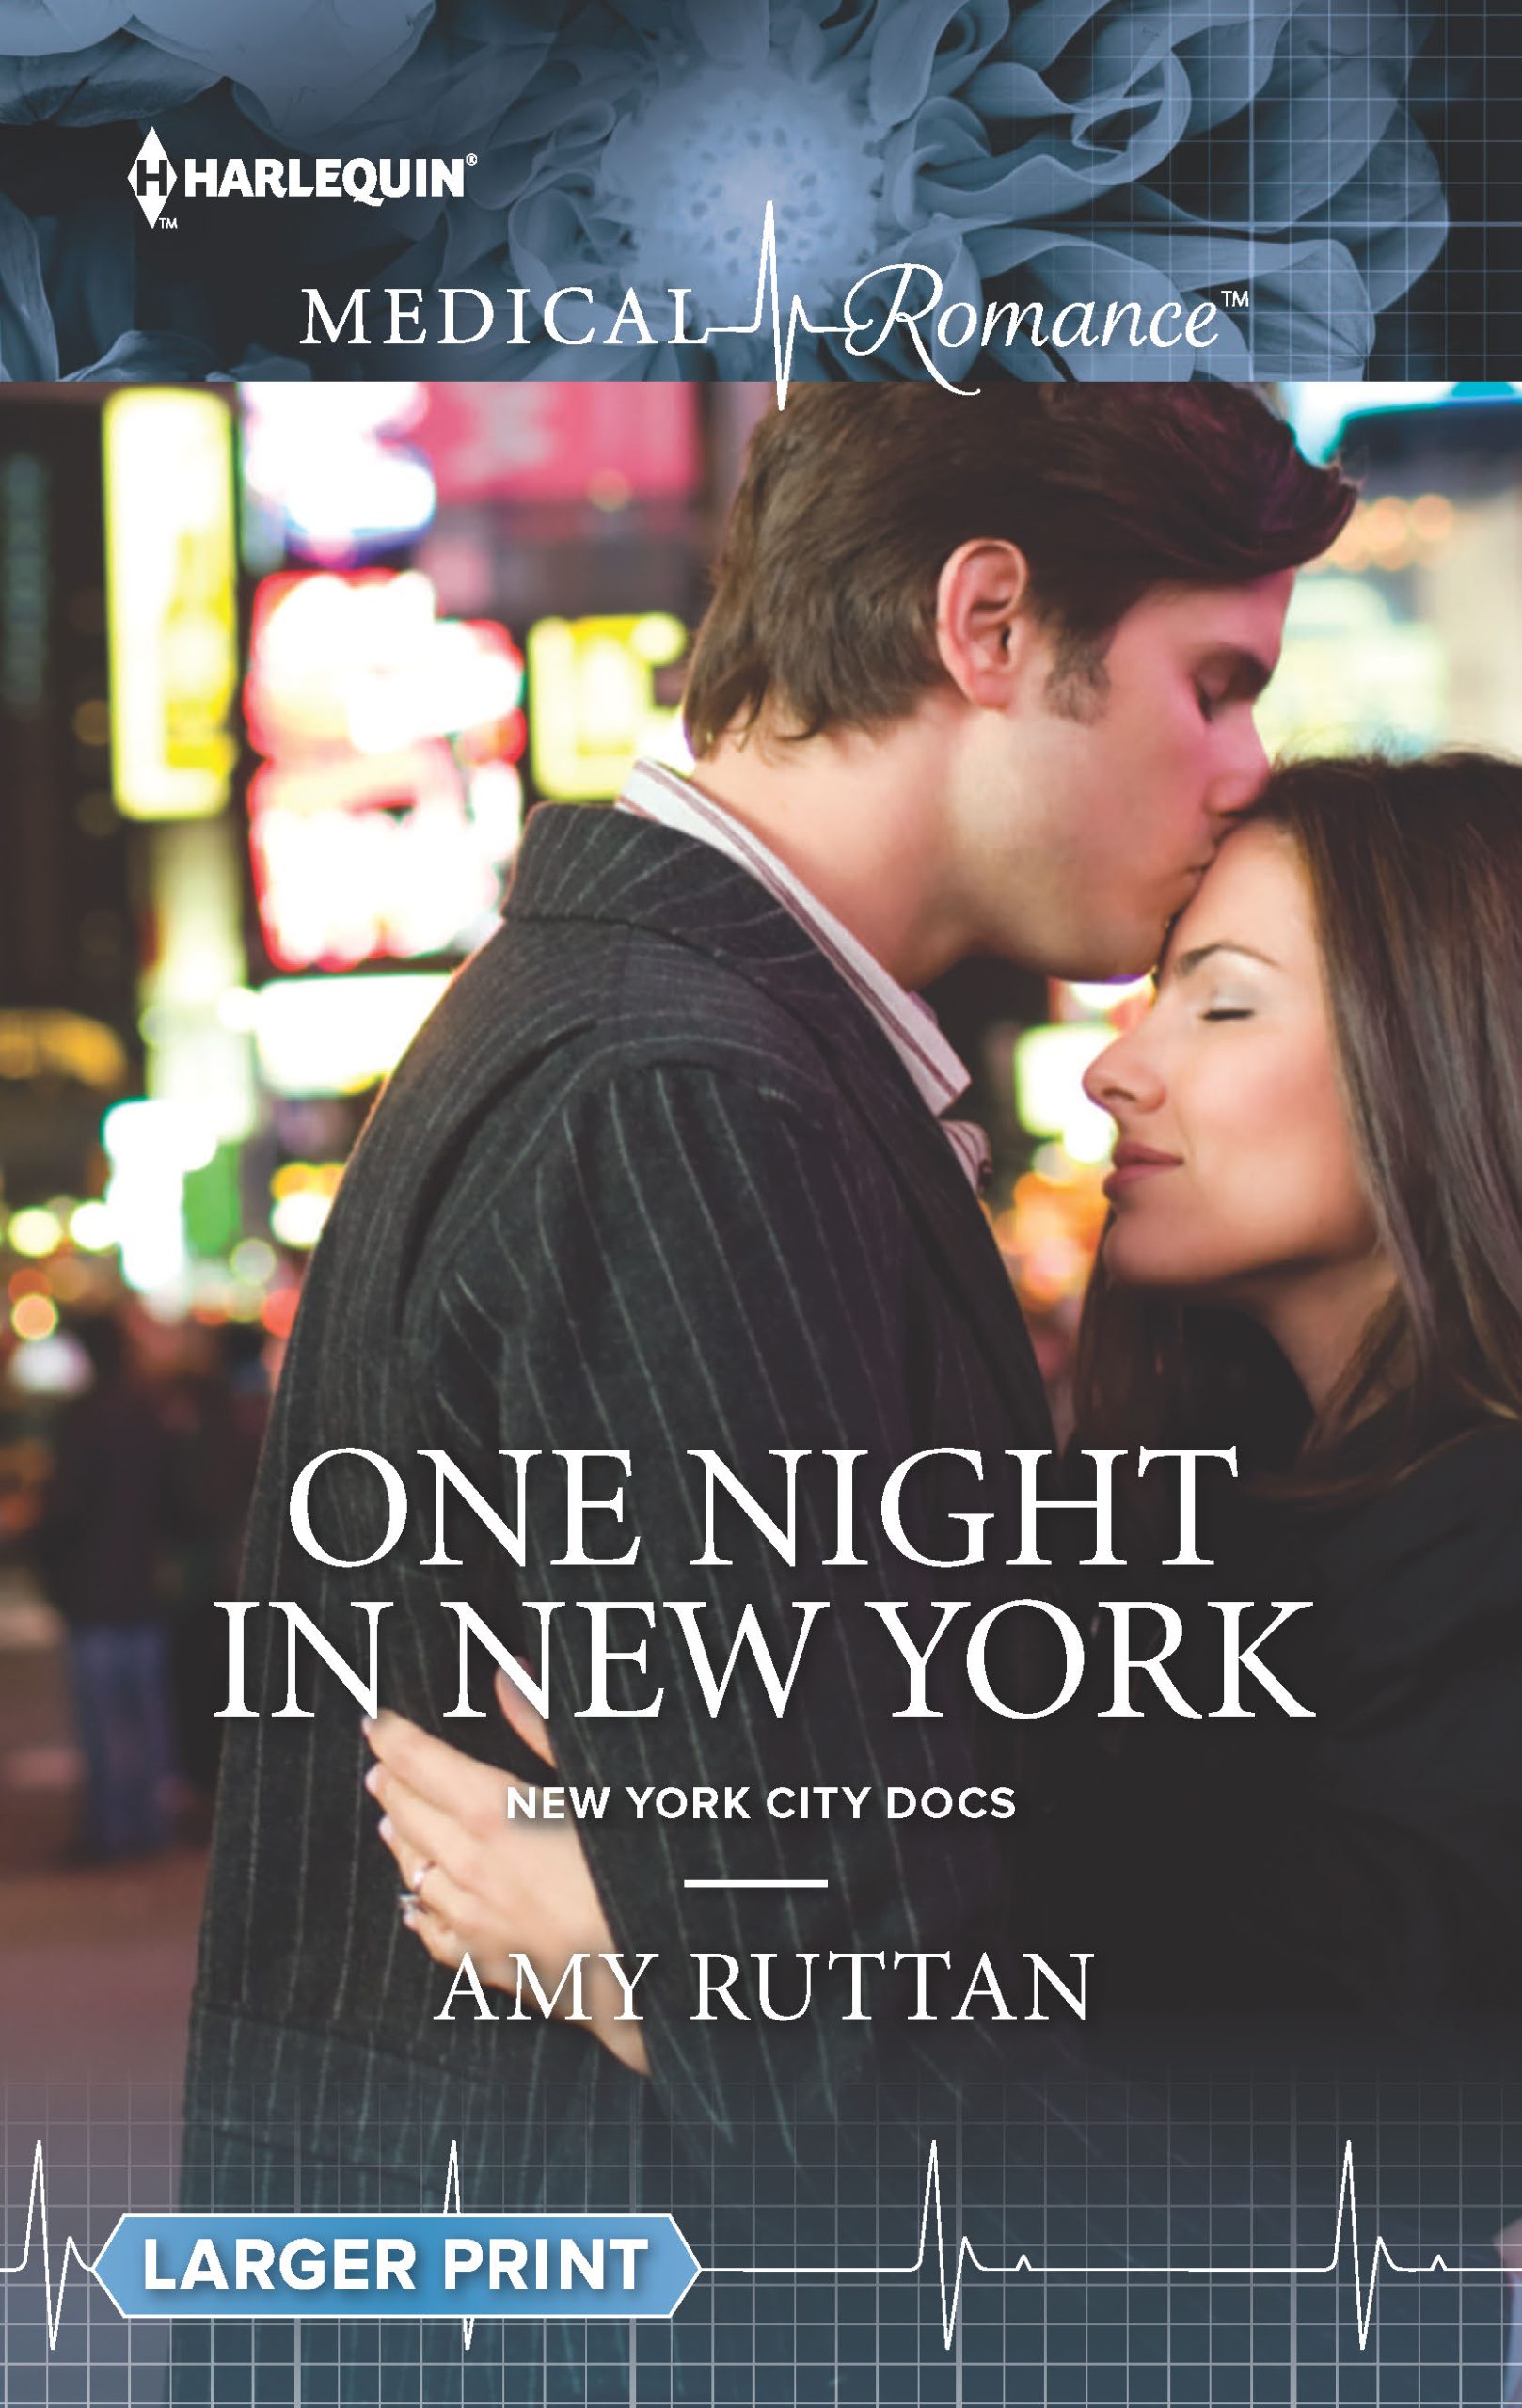 Book Cover for One Night In New York by Amy Ruttan